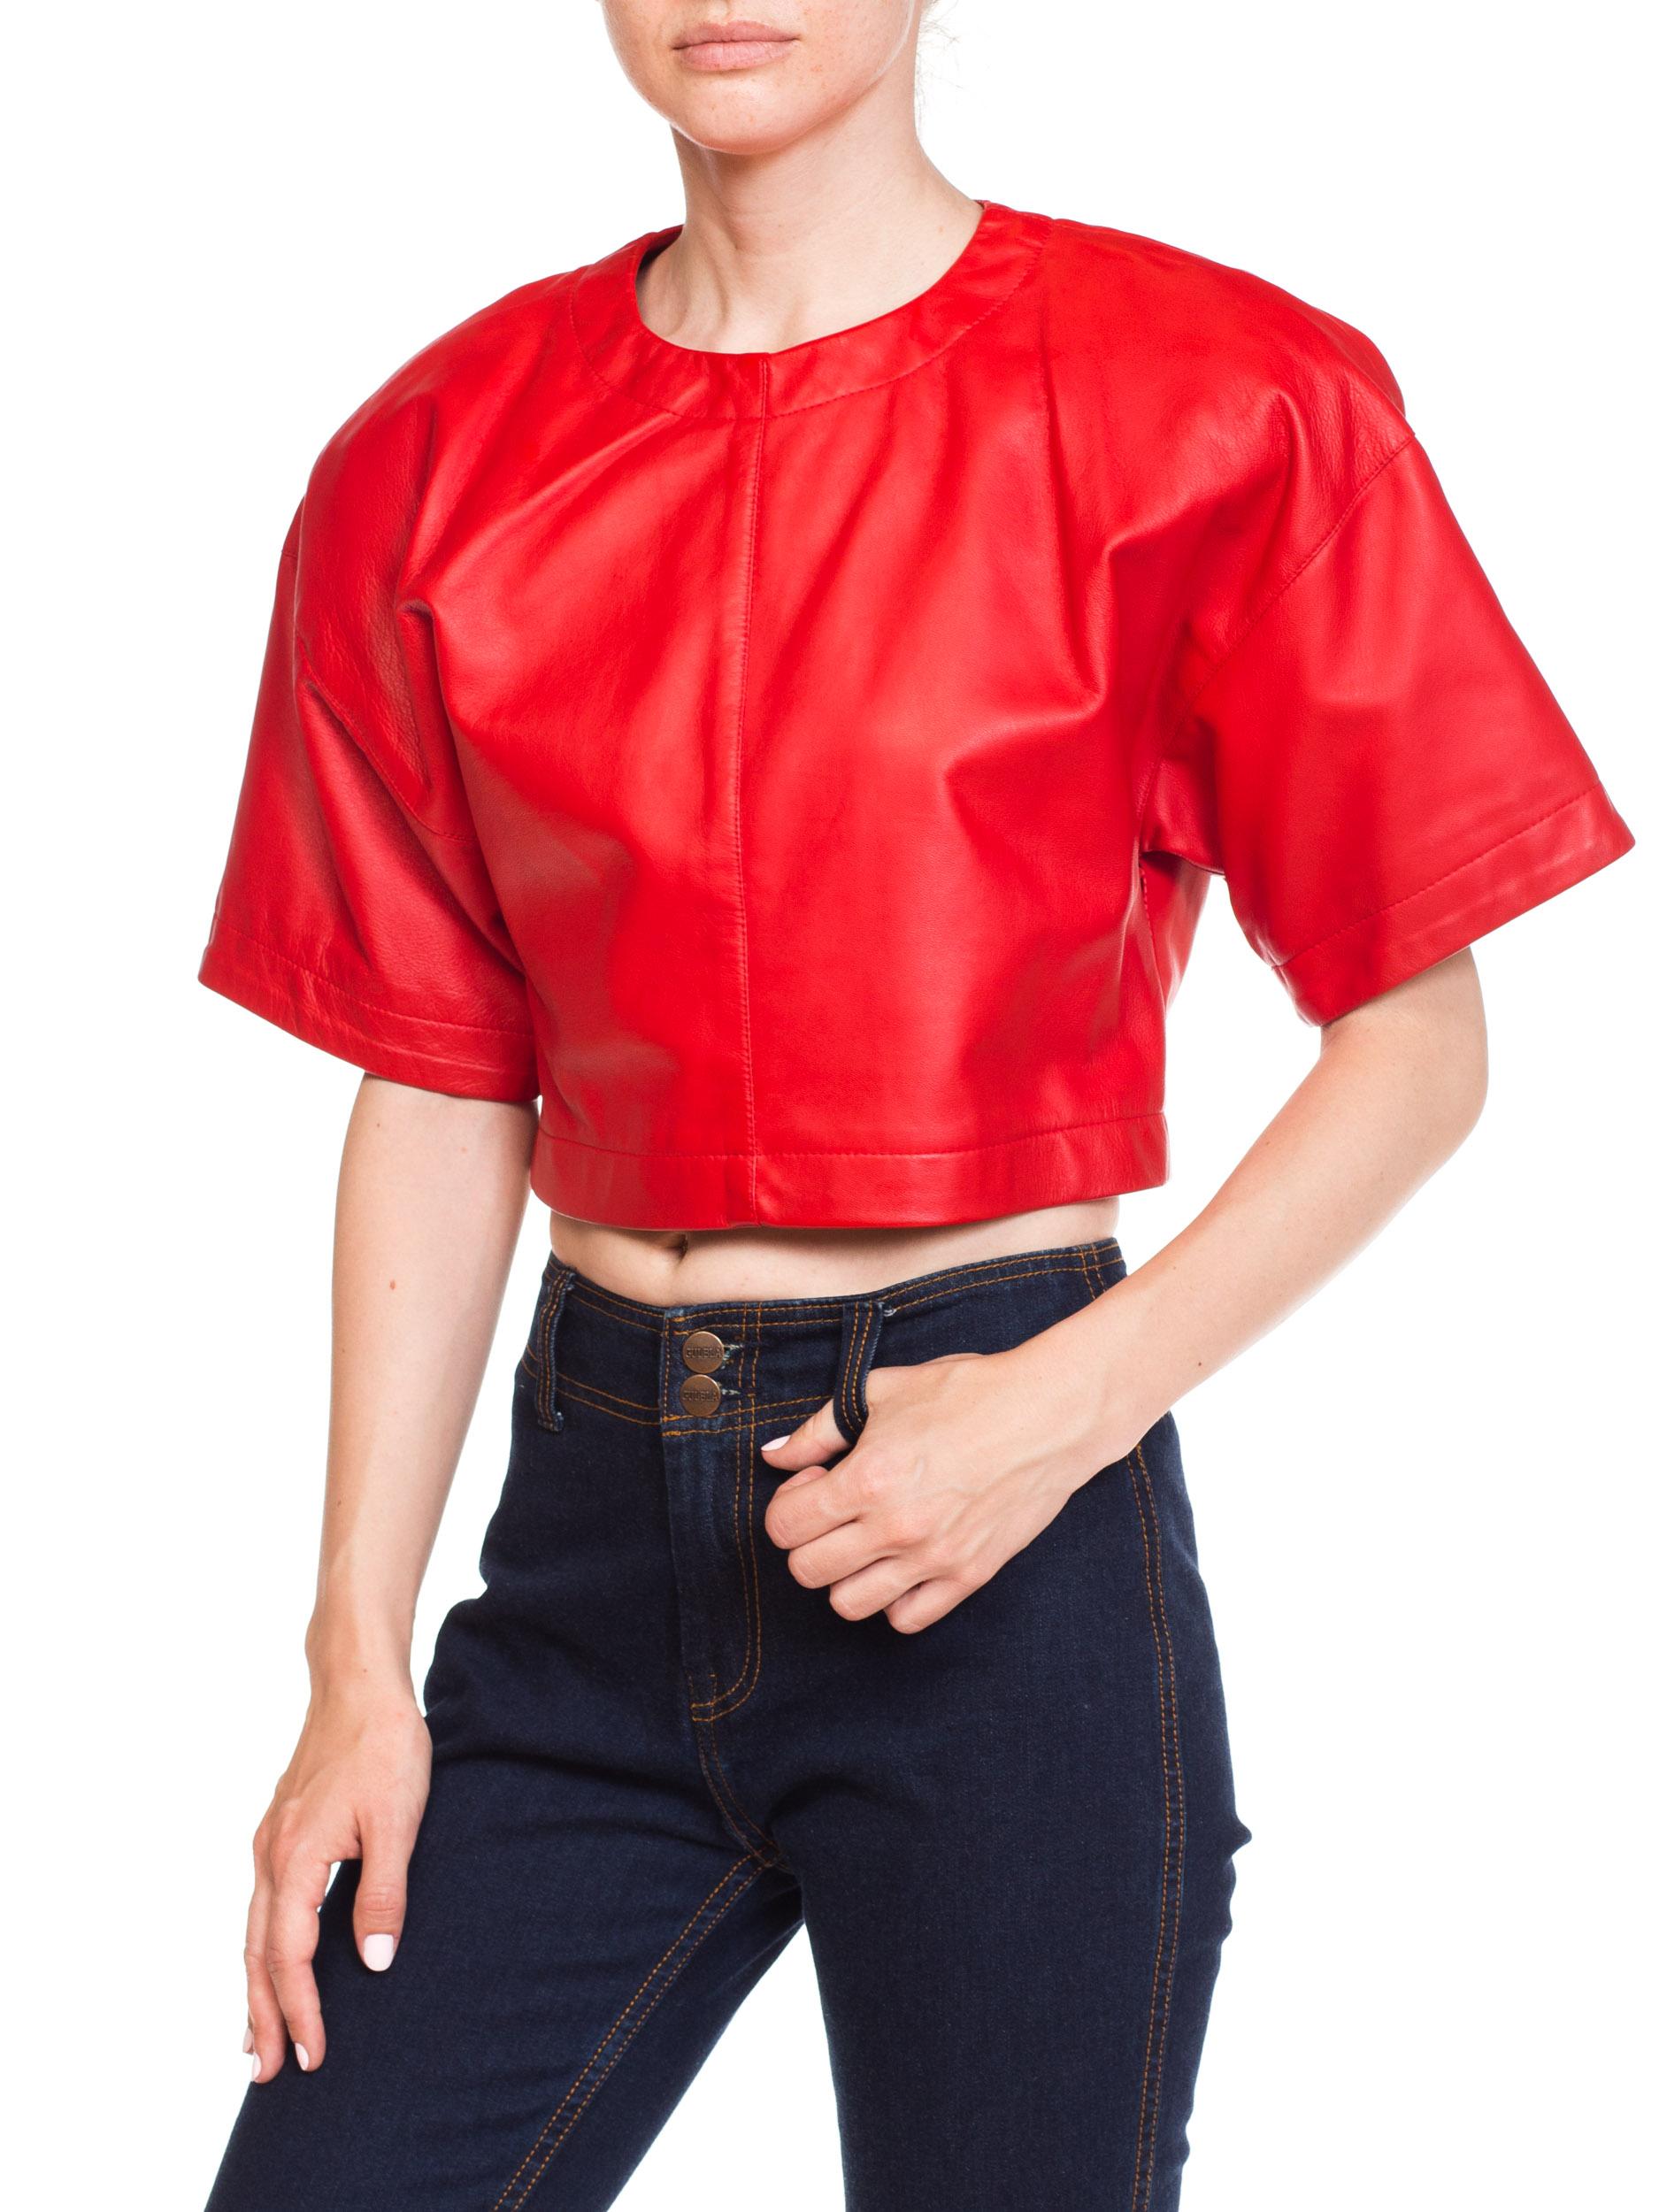 1980s Red Leather Oversized Crop Top 3